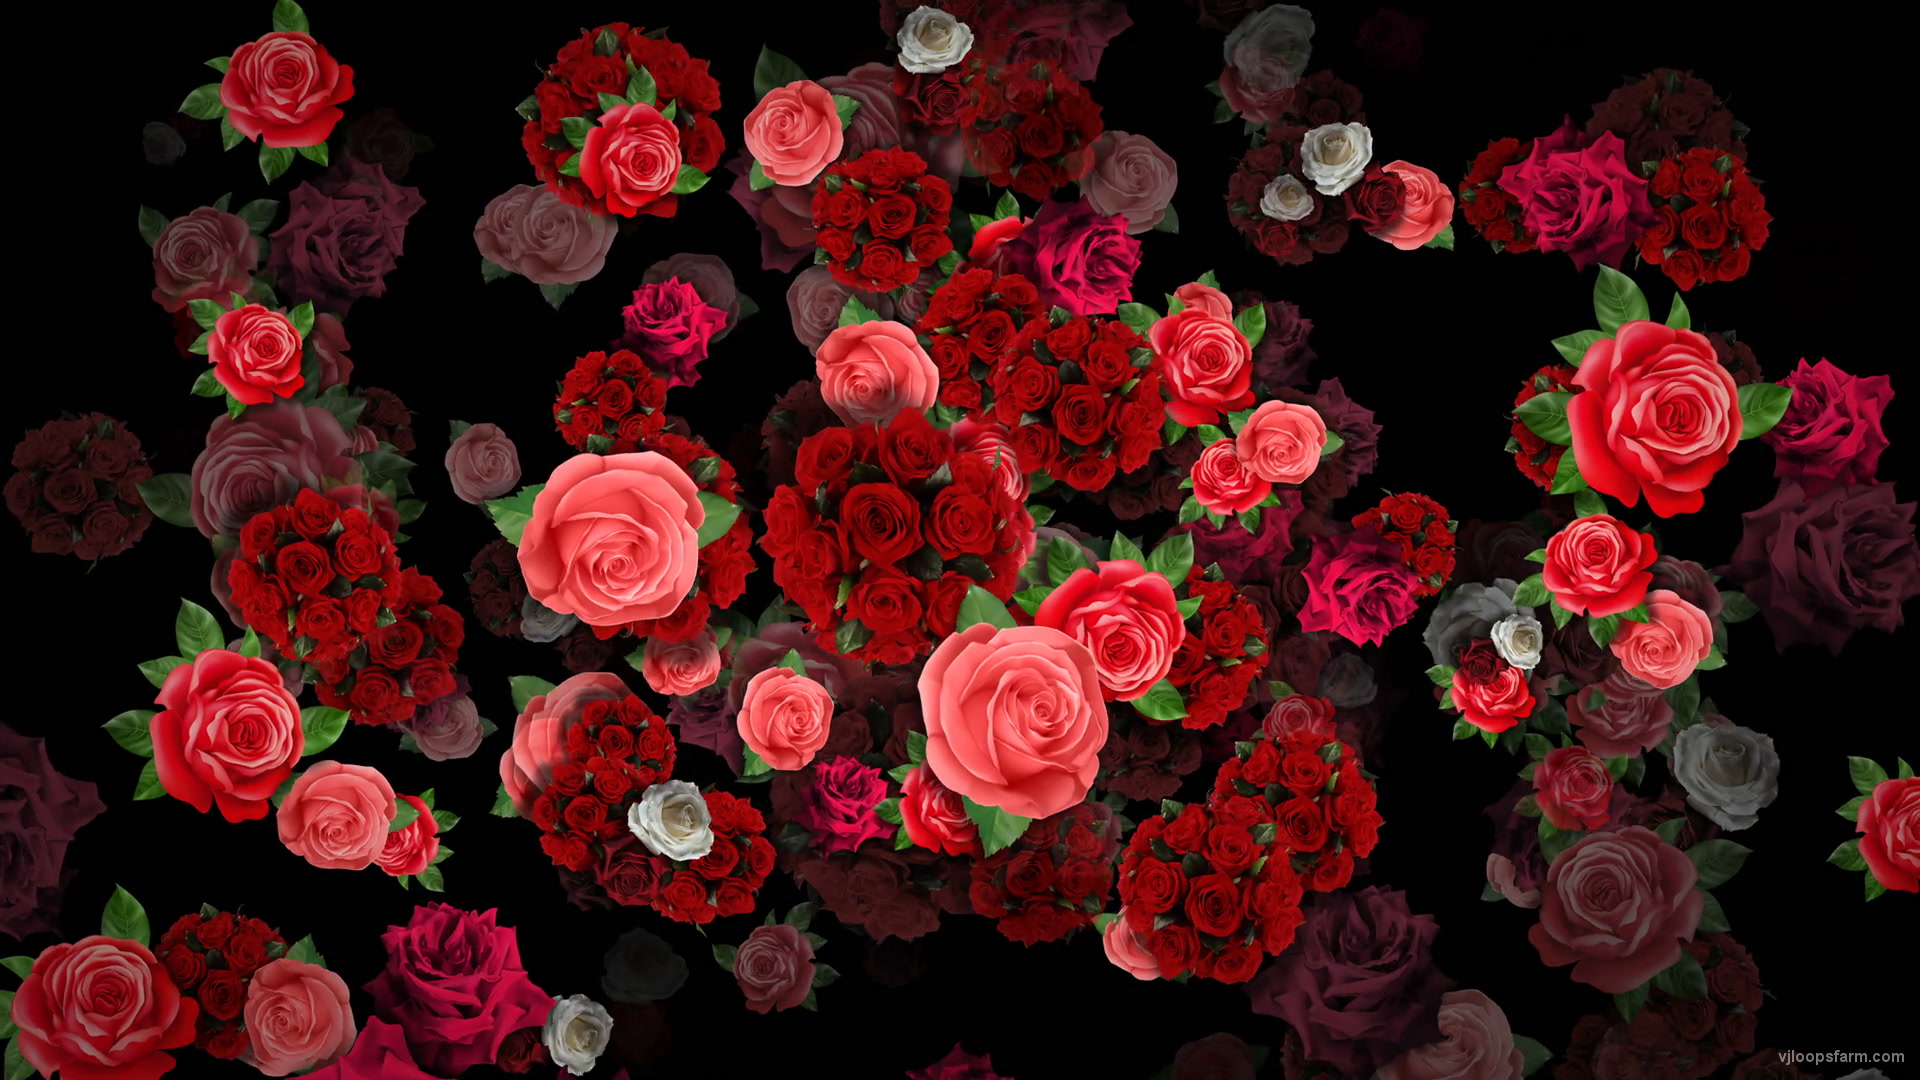 Mulicolored Roses Bouquets Falling Down Looped Motion Background | VJ ...